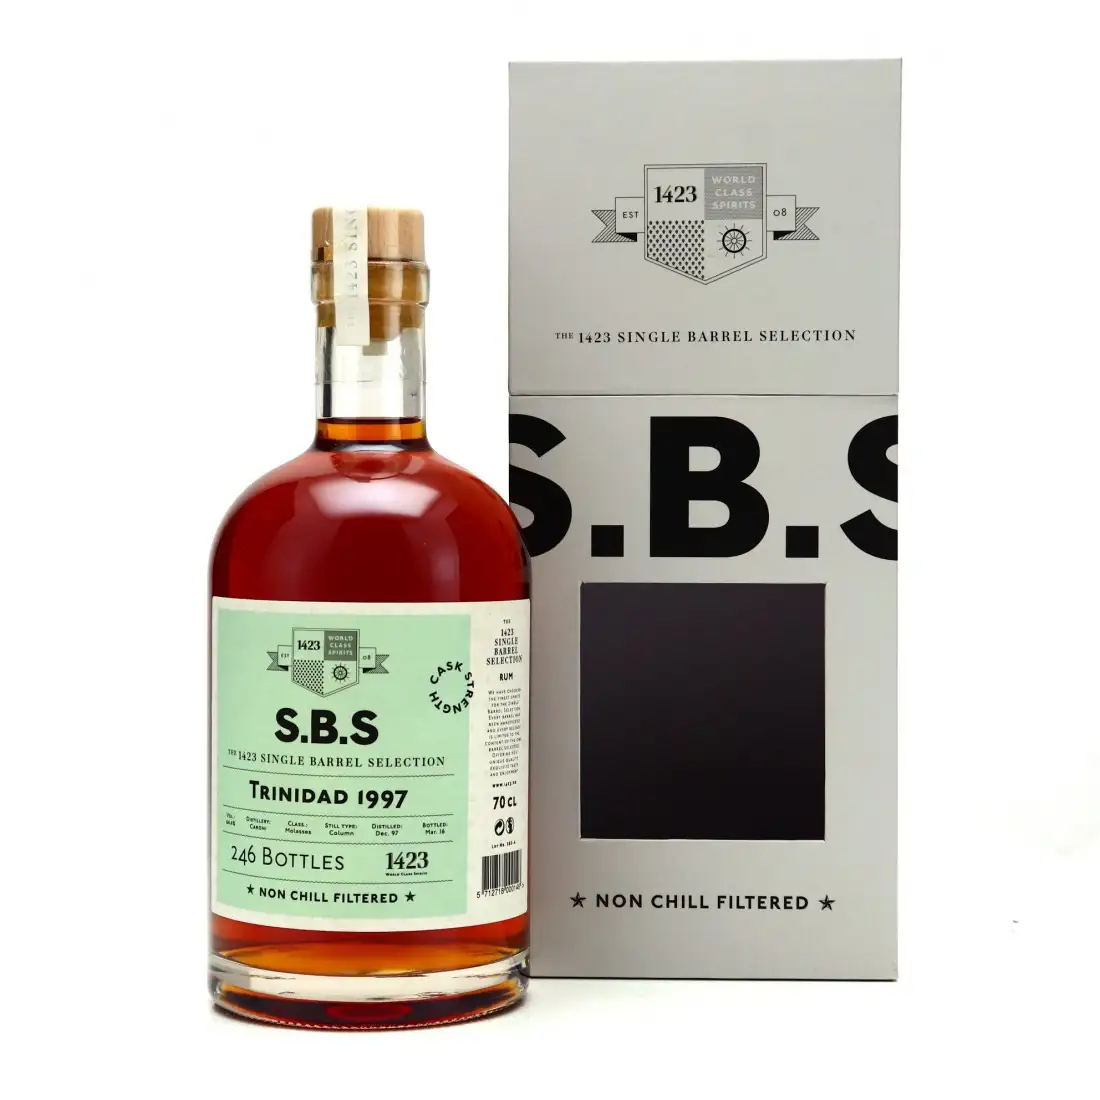 Image of the front of the bottle of the rum S.B.S Trinidad HTR